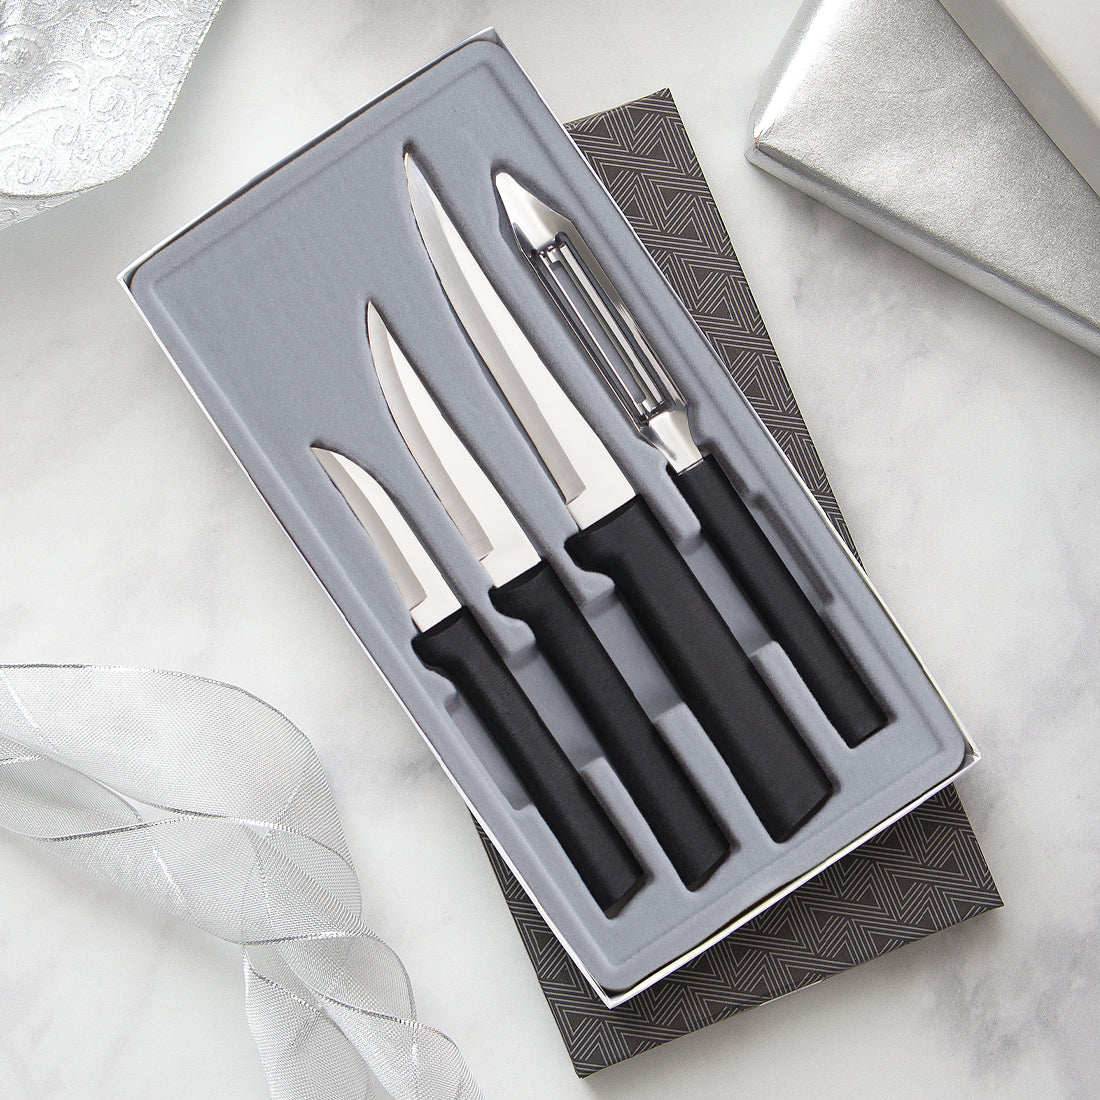 Rada Cutlery Chef Select 3-Piece Large Knife Set – Stainless Steel Culinary  Knives With Aluminum Handles